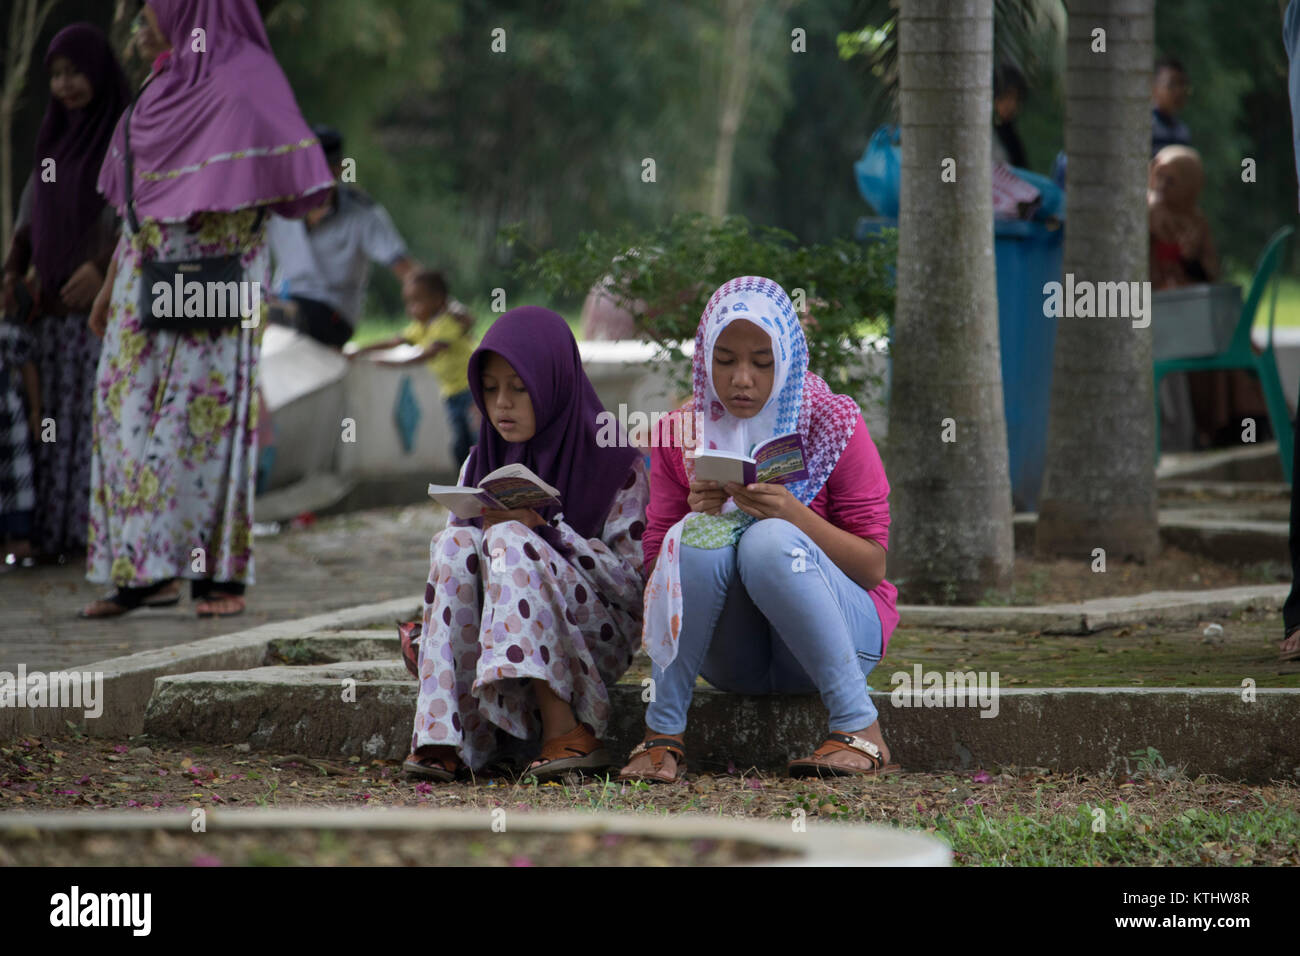 Aceh Besar, Indonesia. 26th Dec, 2017. Acehnese people praying in the mass grave of Siron, Aceh Besar Regency, Aceh Province, Indonesia. In the cemetery, there were more than 40.000 bodies of tsunami victims. Credit: Abdul Hadi Firsawan/Pacific Press/Alamy Live News Stock Photo